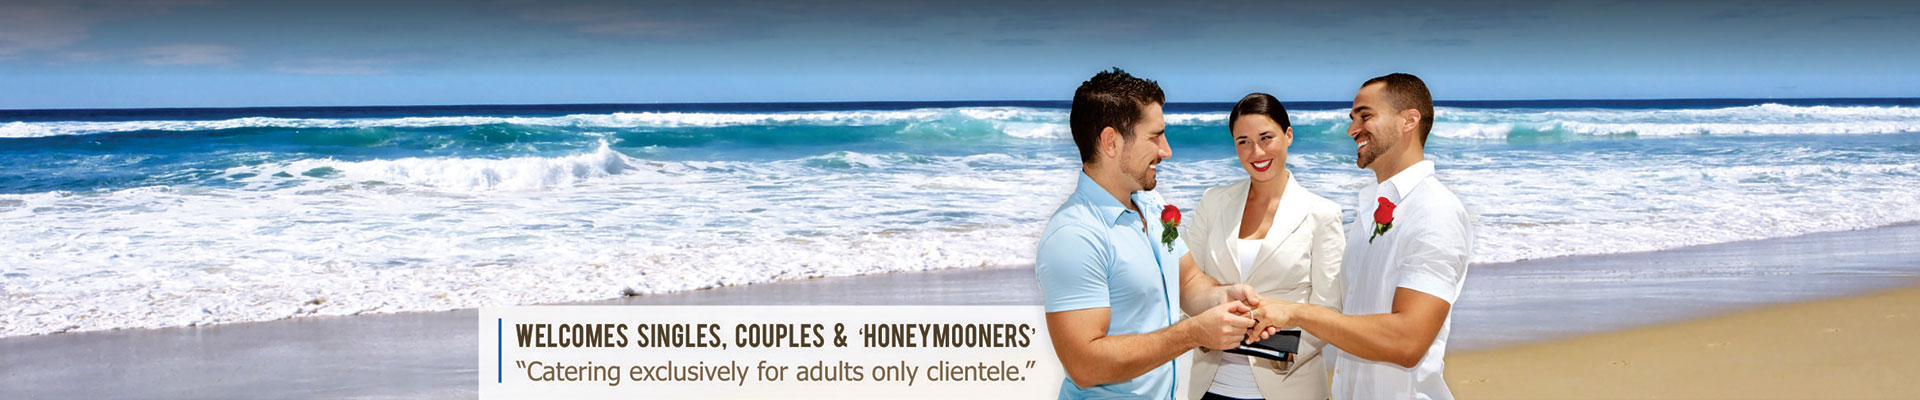 Welcomes singles, couples and 'honeymooners'